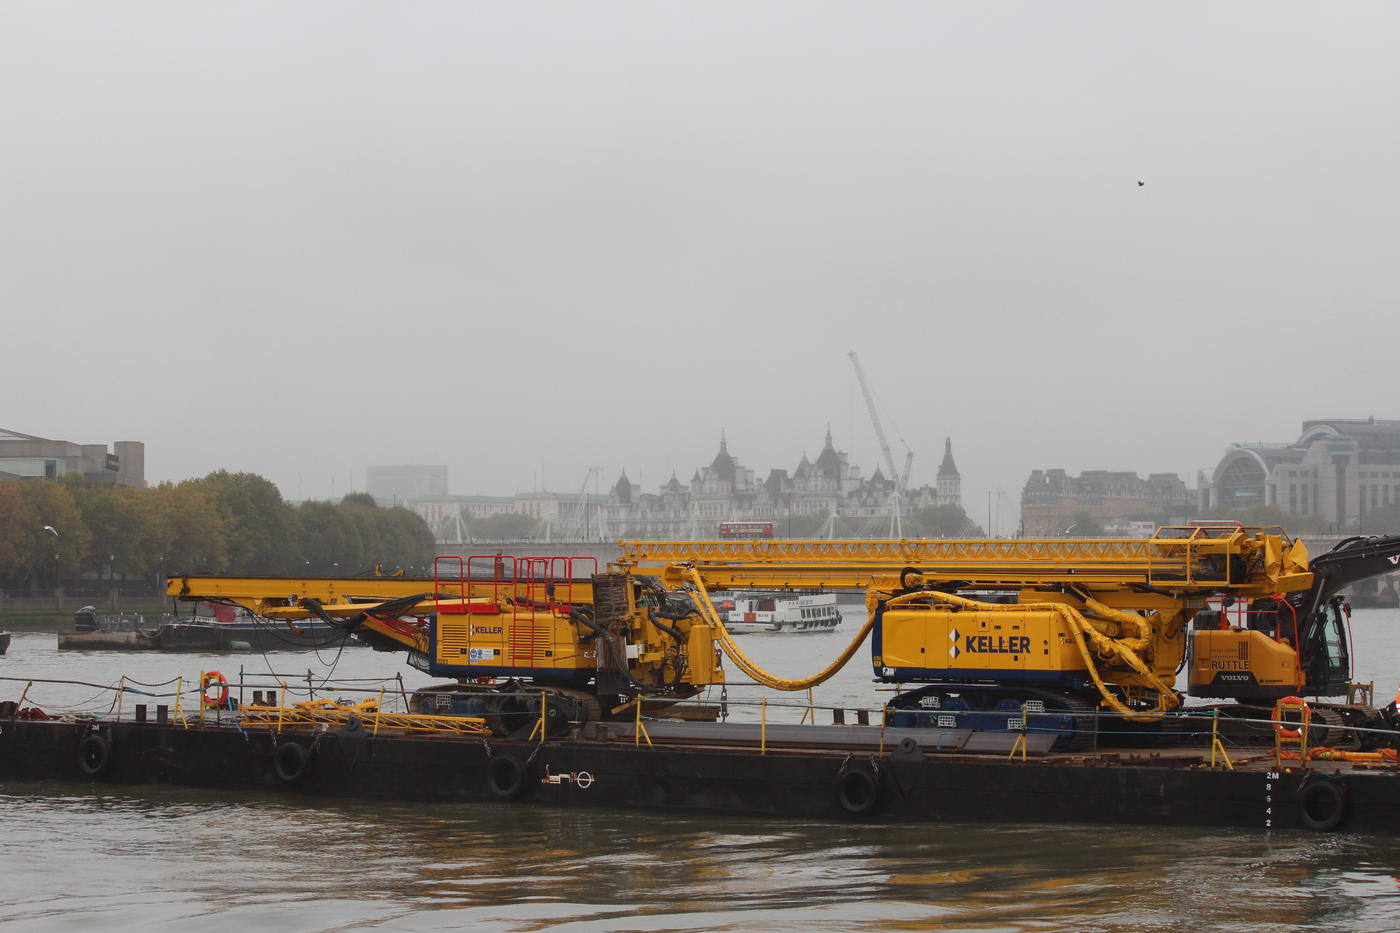 The Keller rigs delivered to site by barge